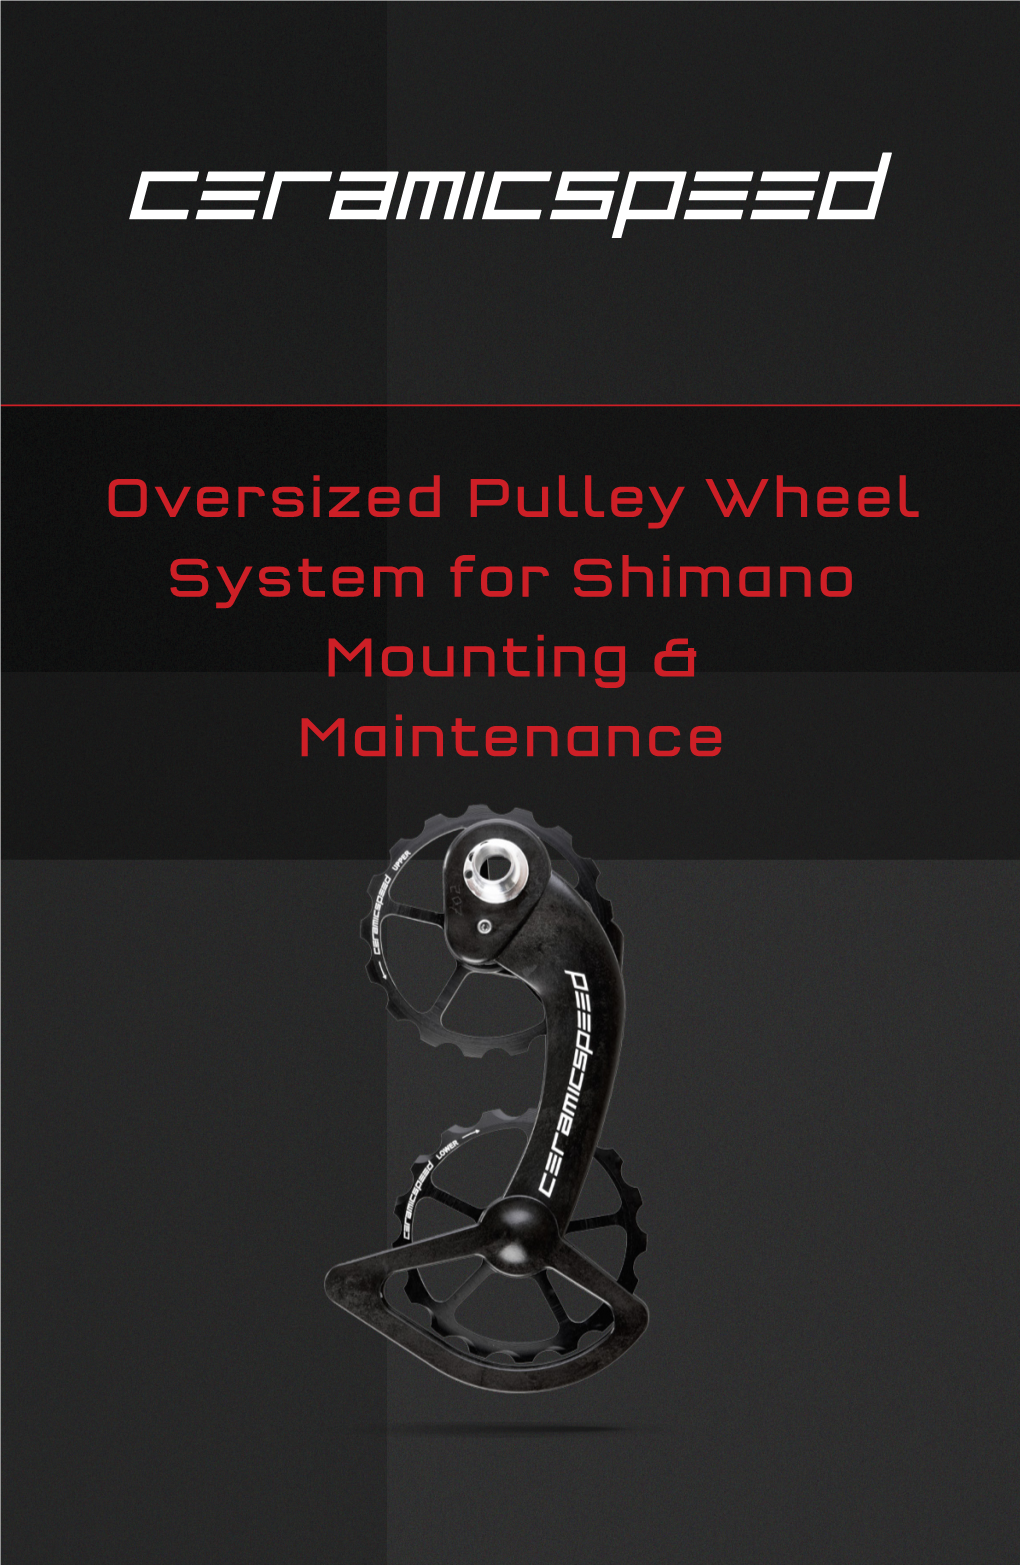 Oversized Pulley Wheel System for Shimano Mounting & Maintenance